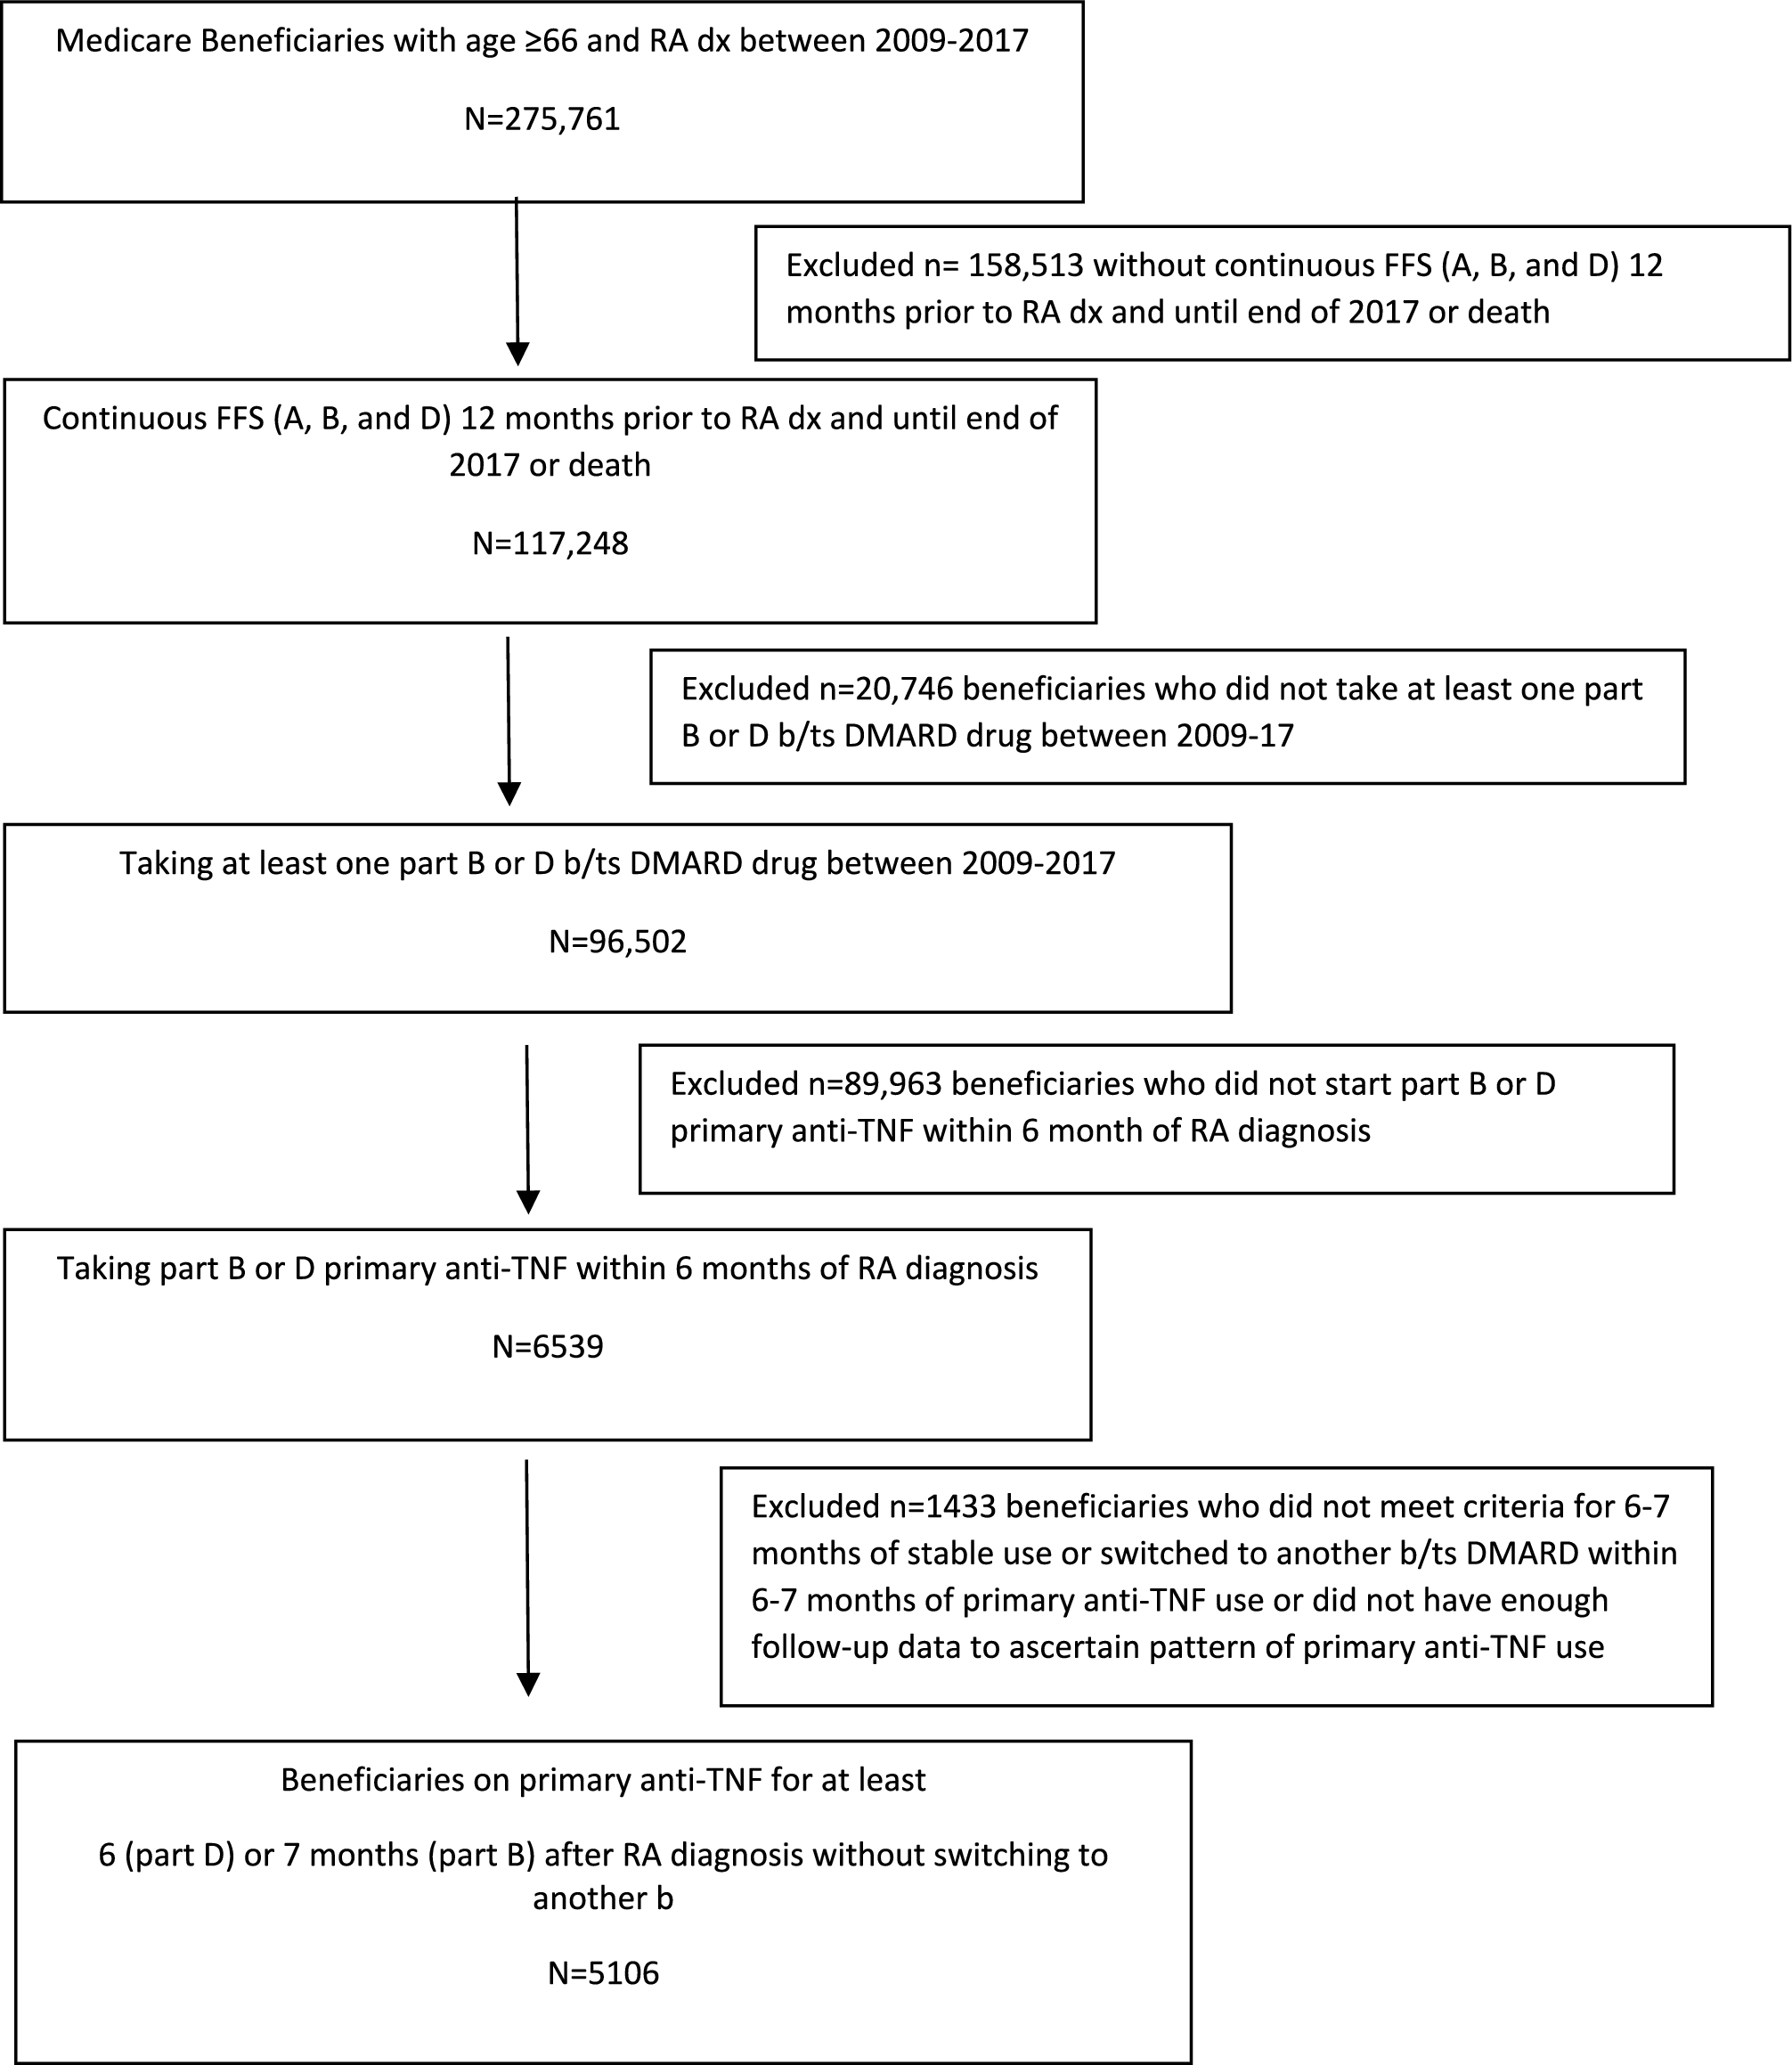 Prevalence and Factors Associated with De-escalation of Anti-TNFs in Older Adults with Rheumatoid Arthritis: A Medicare Claims-Based Observational Study